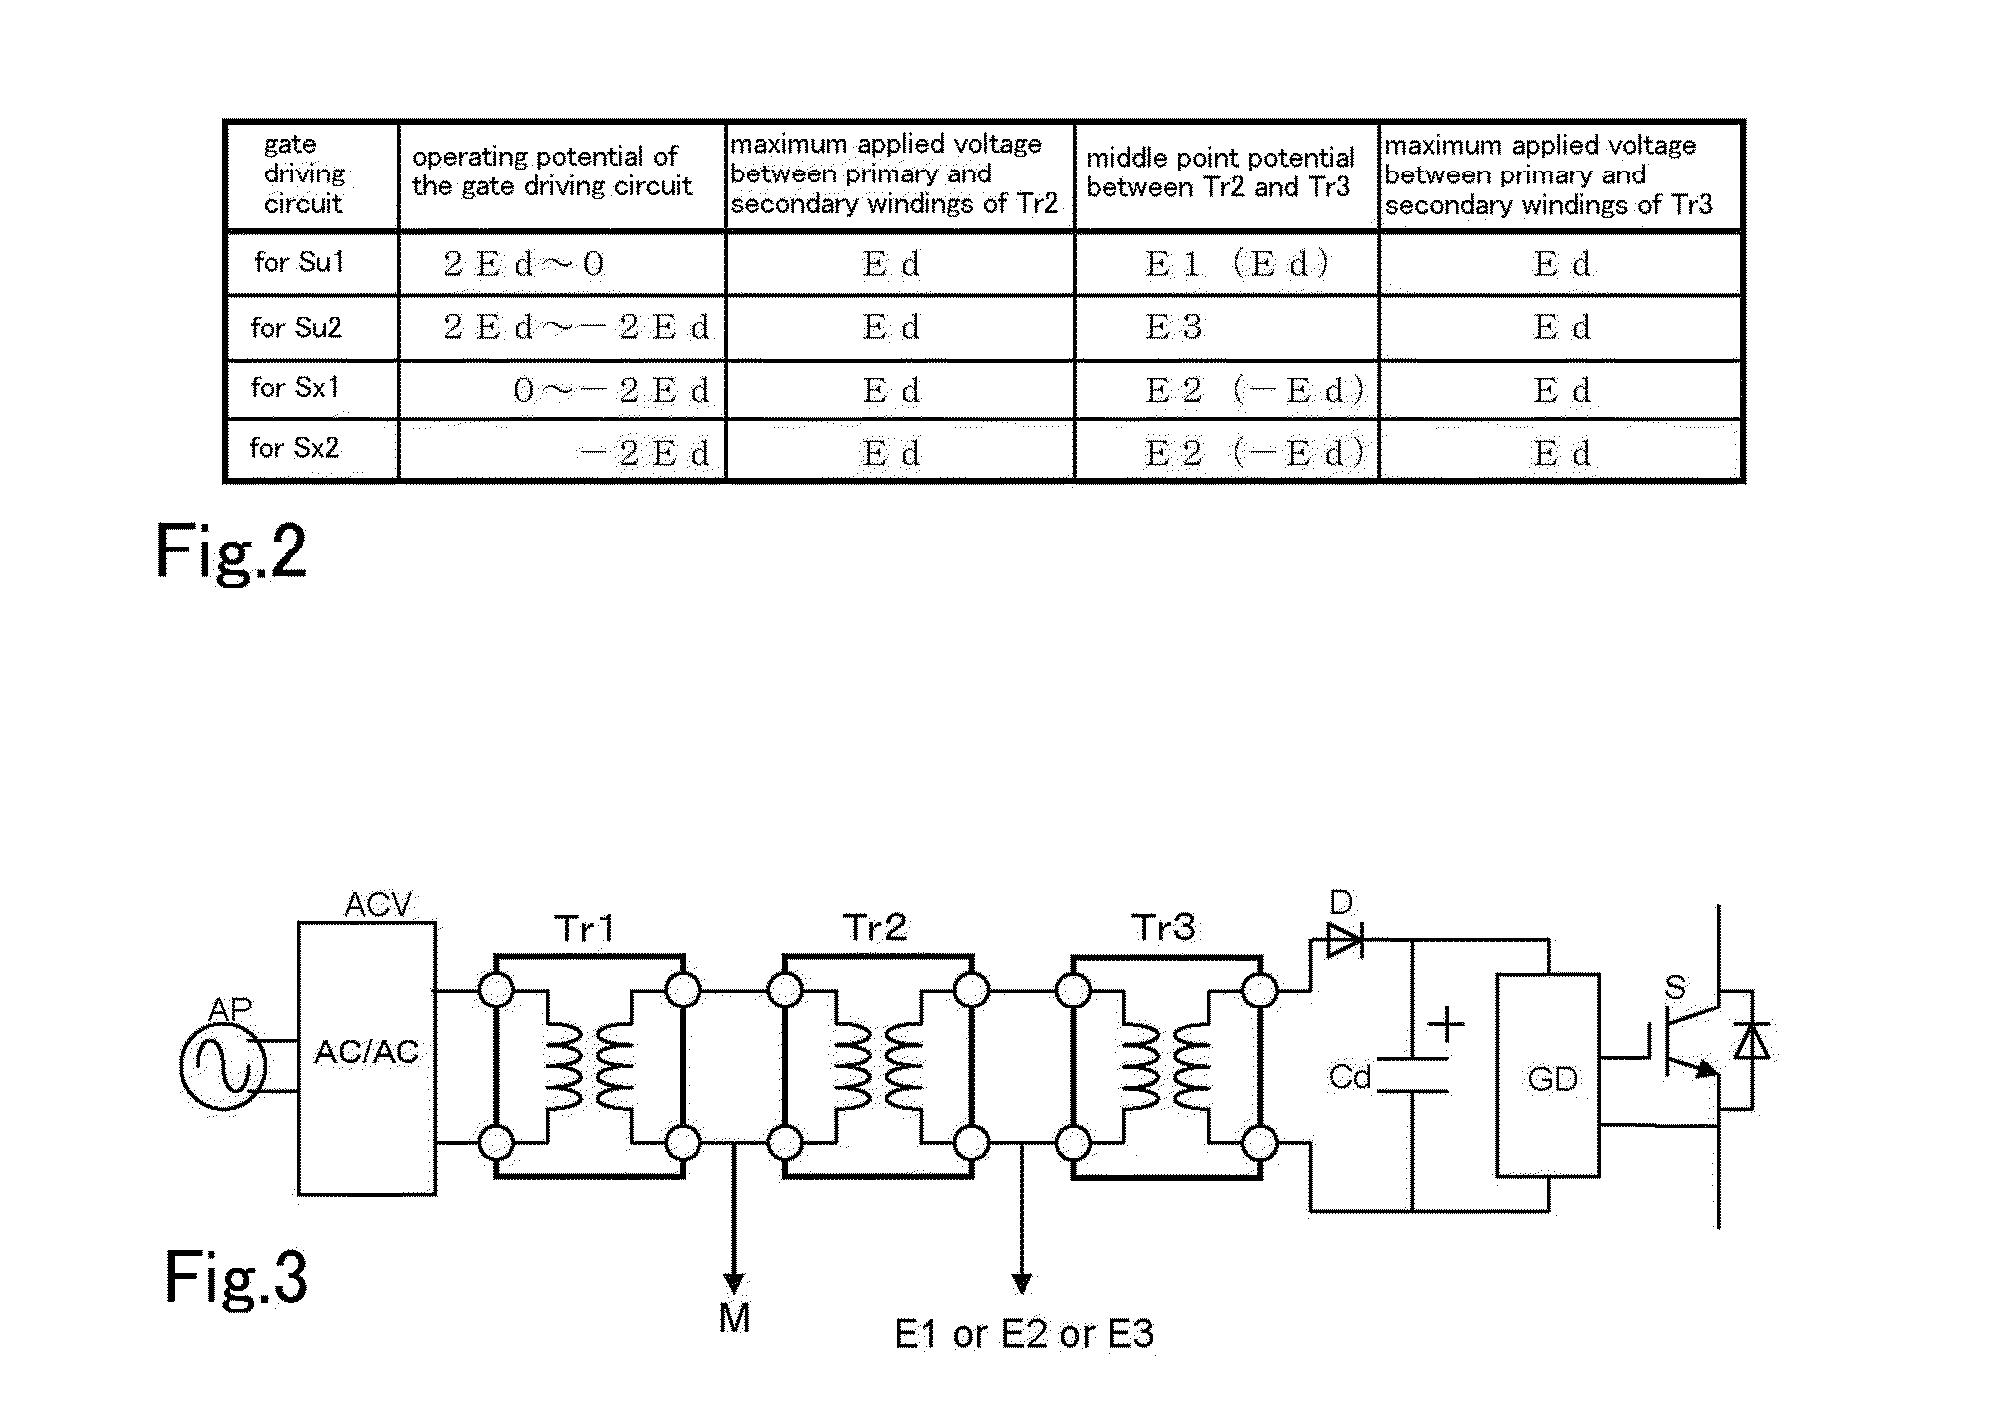 Power supply circuit for gate driving circuit of a power converter